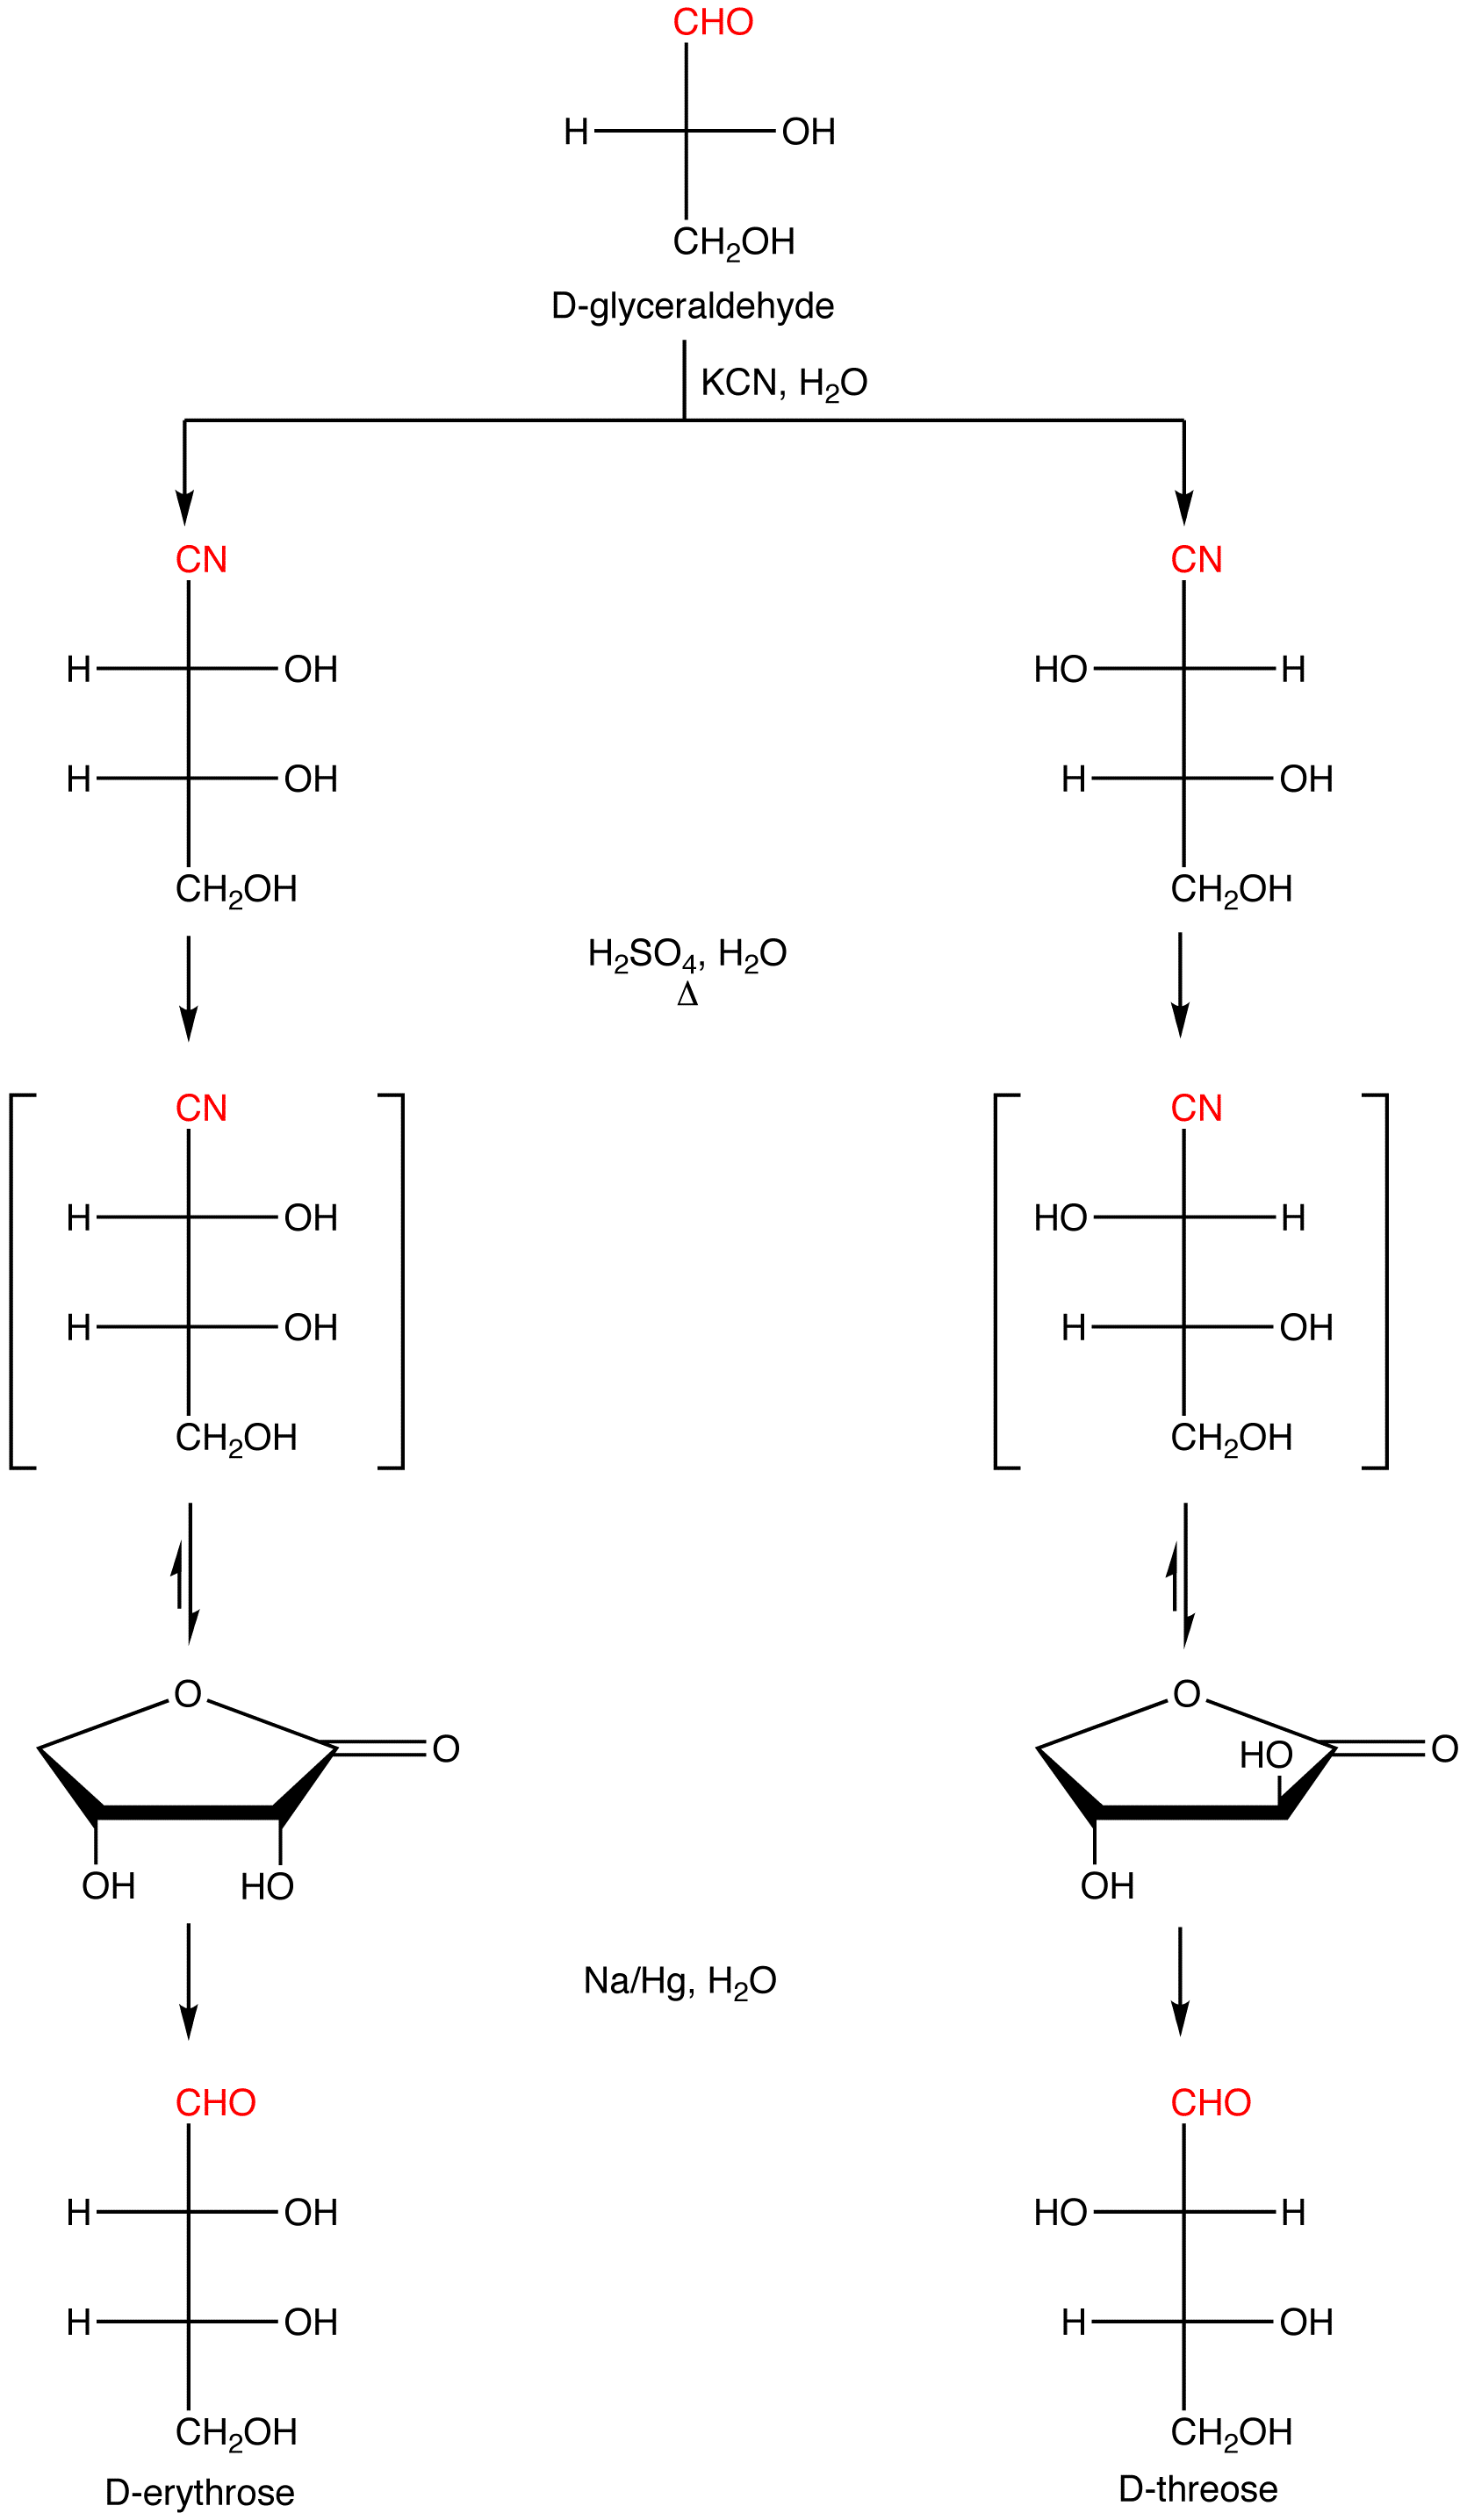 kilianifischersynthesis2.png